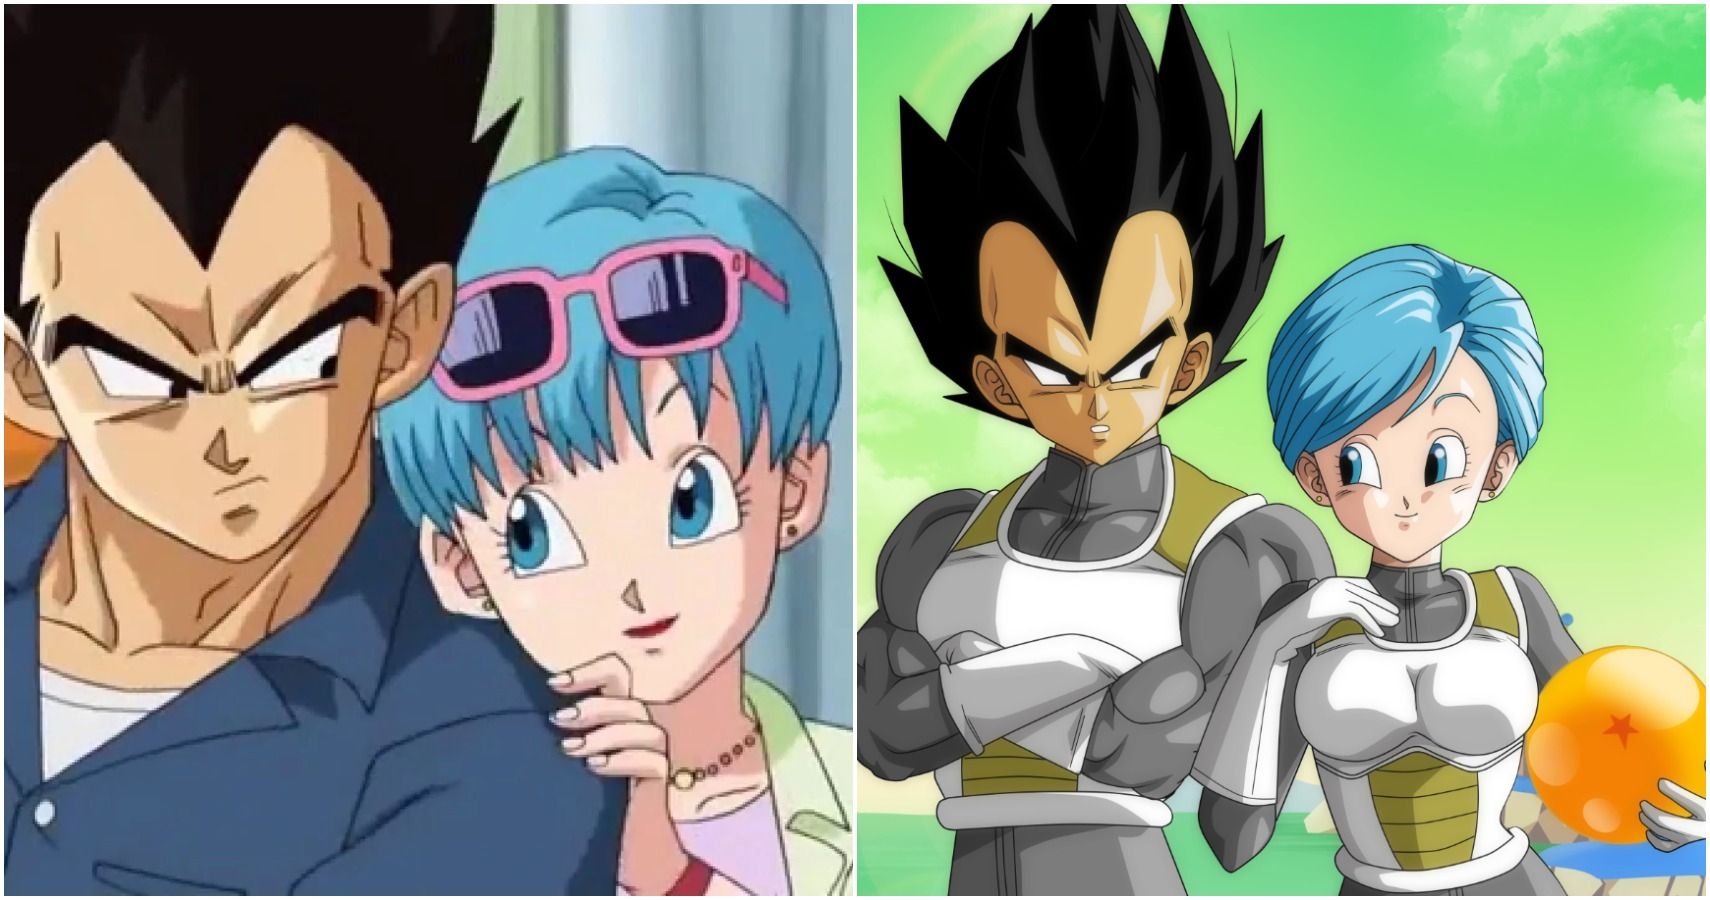 Dragon Ball 10 Fan Art Pictures Of Vegeta Bulma Whose Romance Level Is Over...